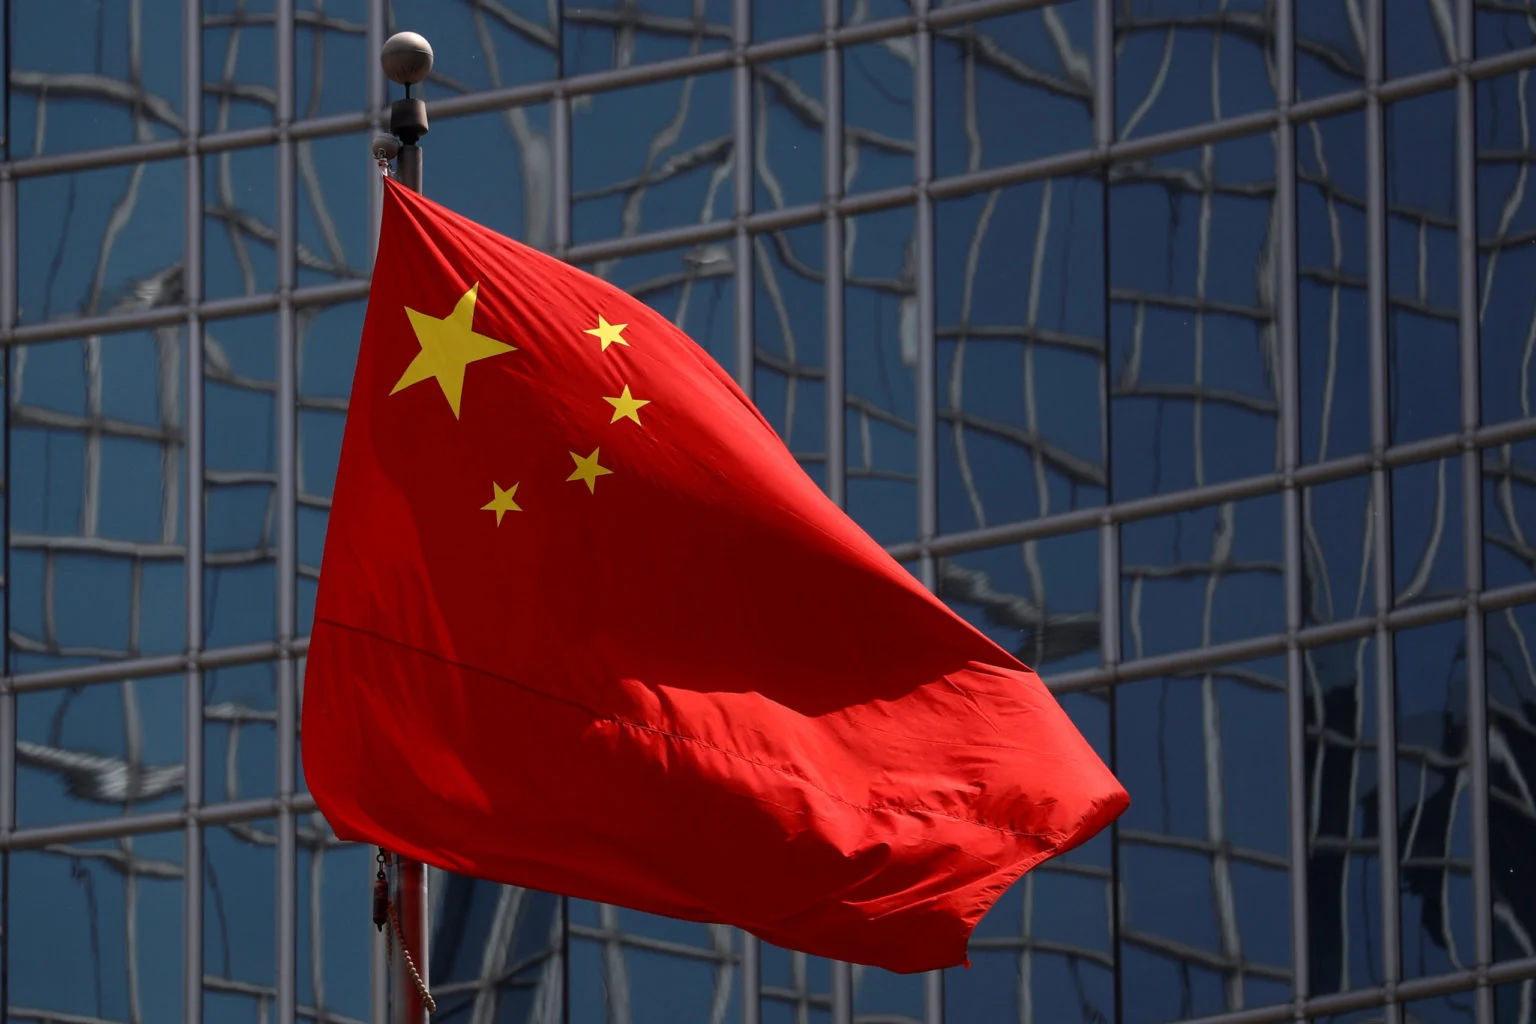 The Chinese national flag is seen in Beijing, China. Photo taken on April 29, 2020. (REUTERS FILE PHOTO)